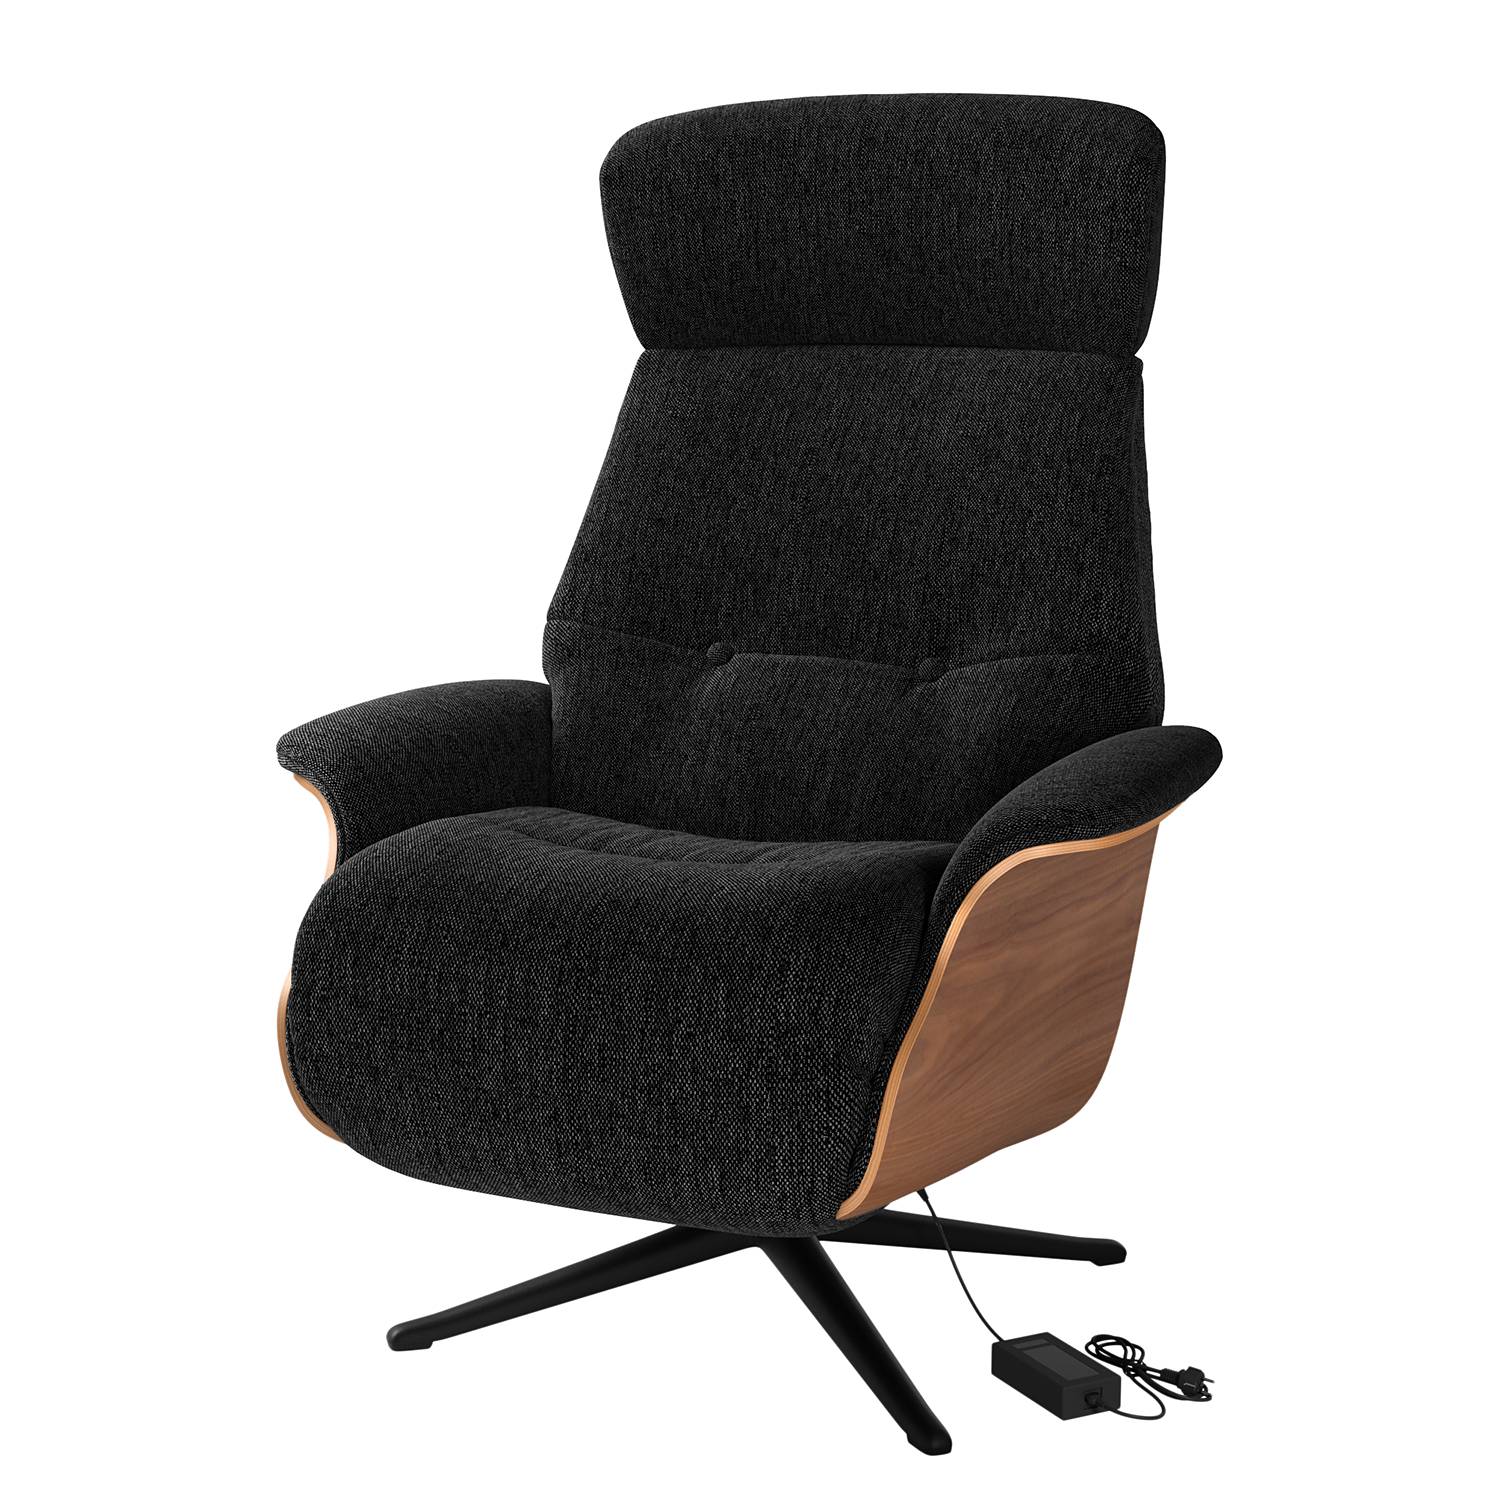 Image of Fauteuil relax Anderson III 000000001000131422